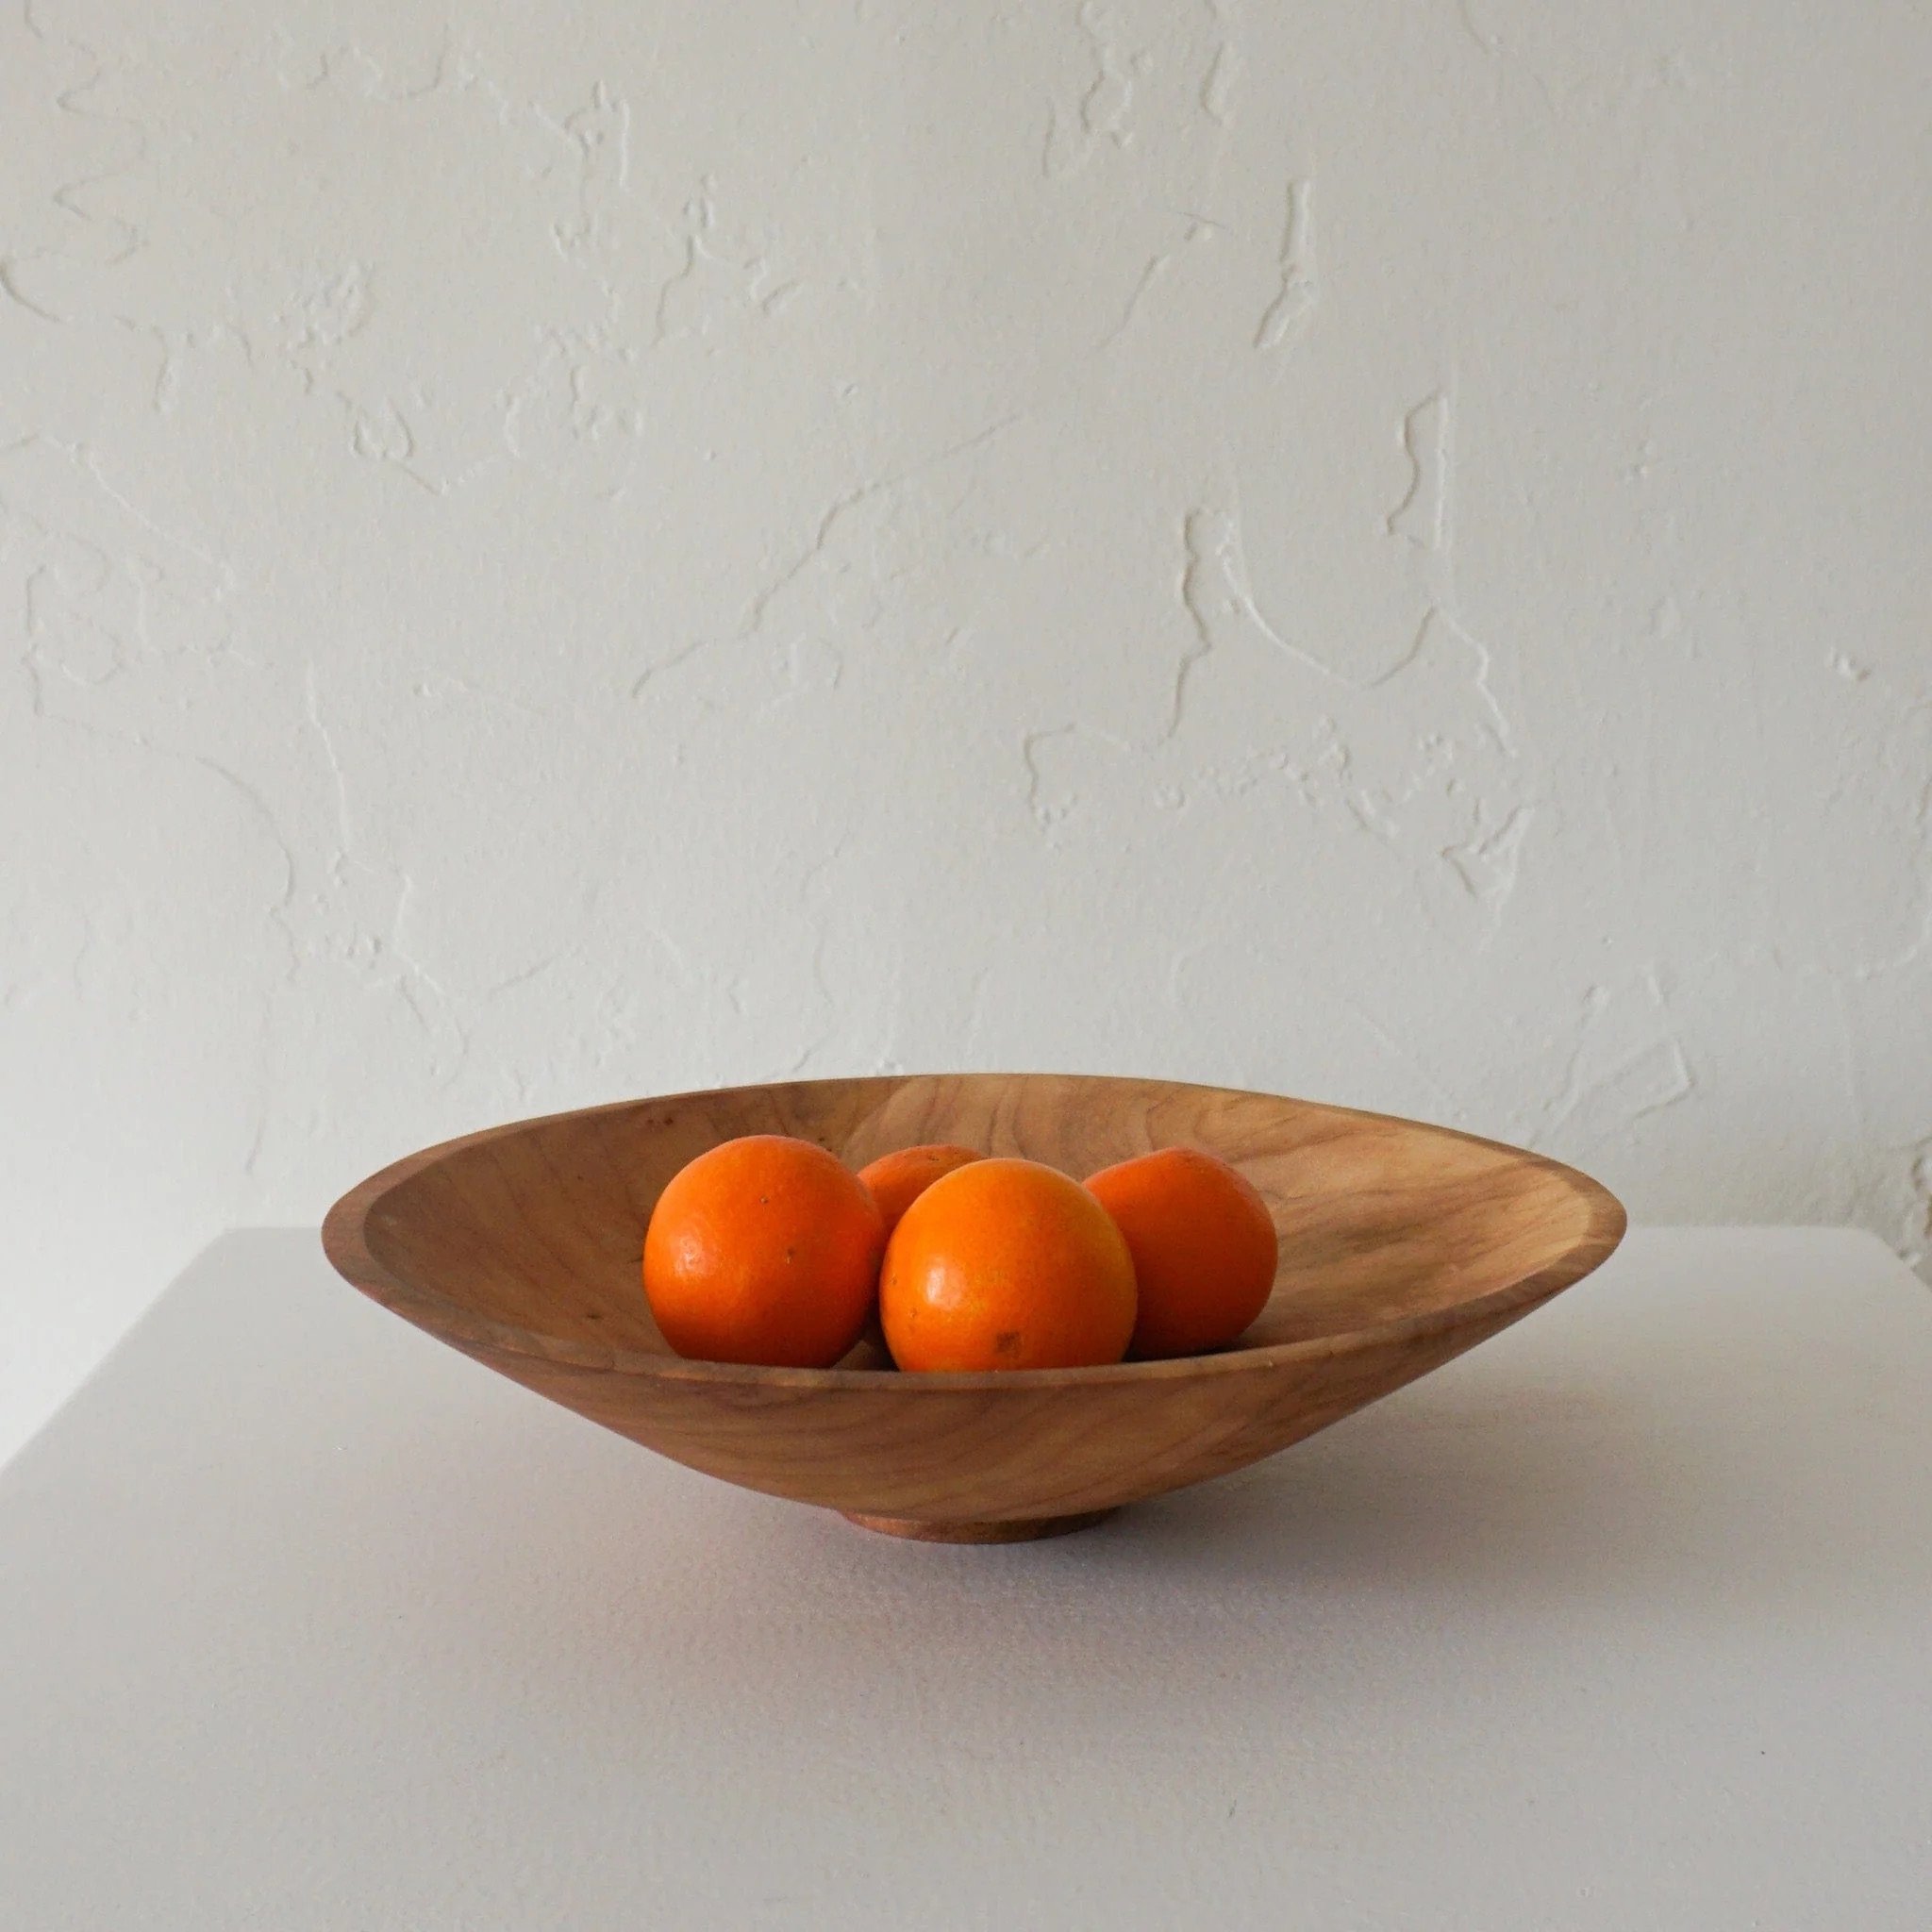 elizabeth-mclauchlan-kitchen-extra-large-shallow-footed-serving-bowl-in-maple-extra-large-39264484688127 (2).jpeg